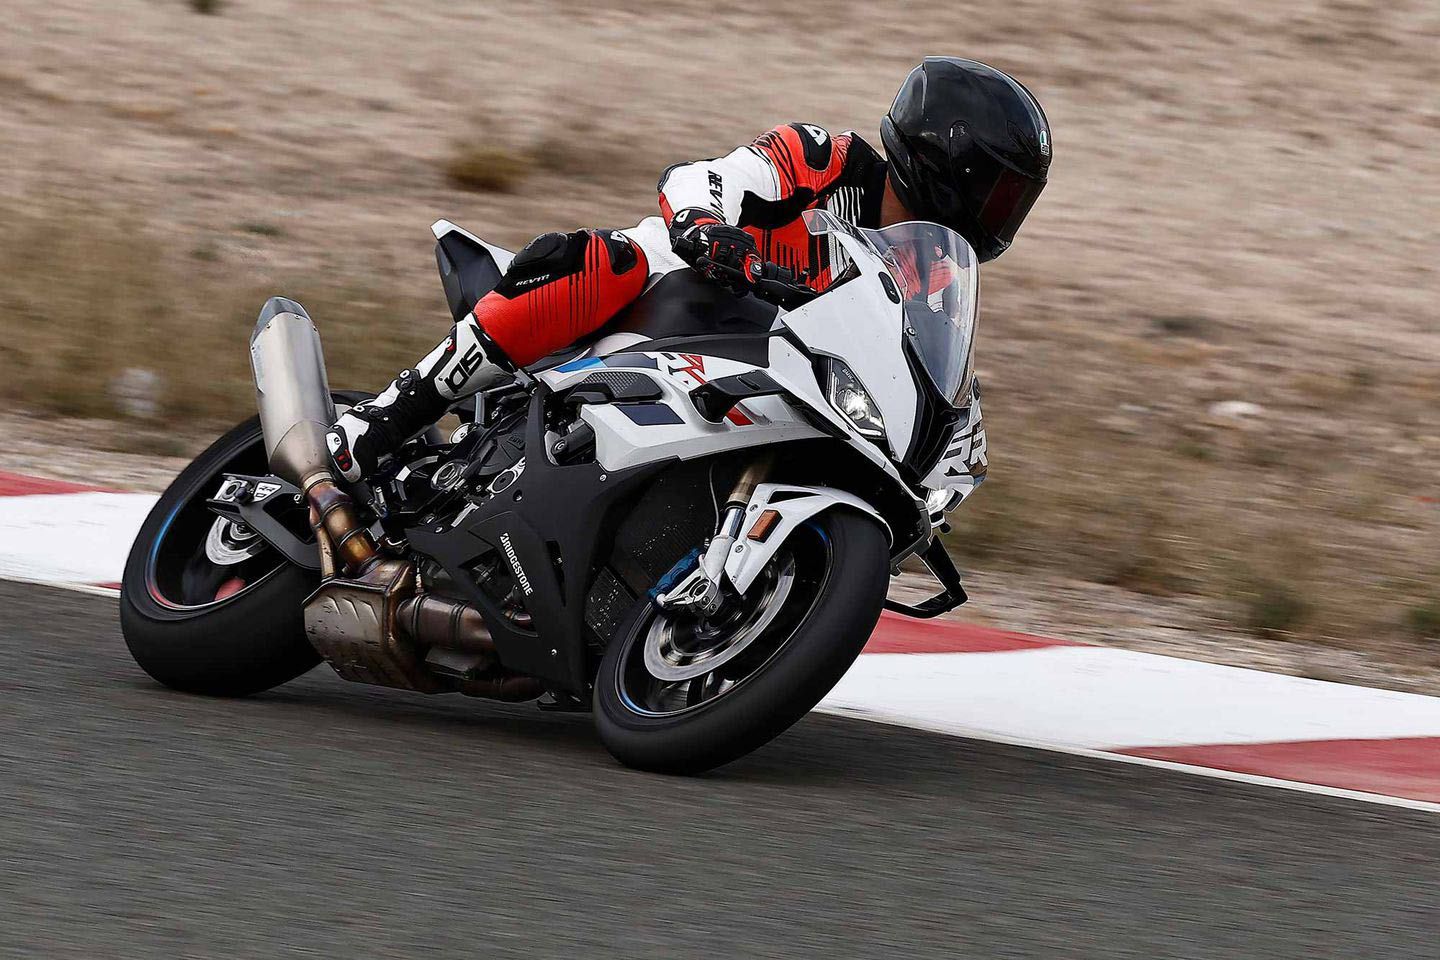 The S 1000 RR feels right at home on the racetrack. Credit BMW’s continued efforts to refine the chassis, which was upgraded for 2023 and provides a great balance between nimble handling and stable, planted feel.